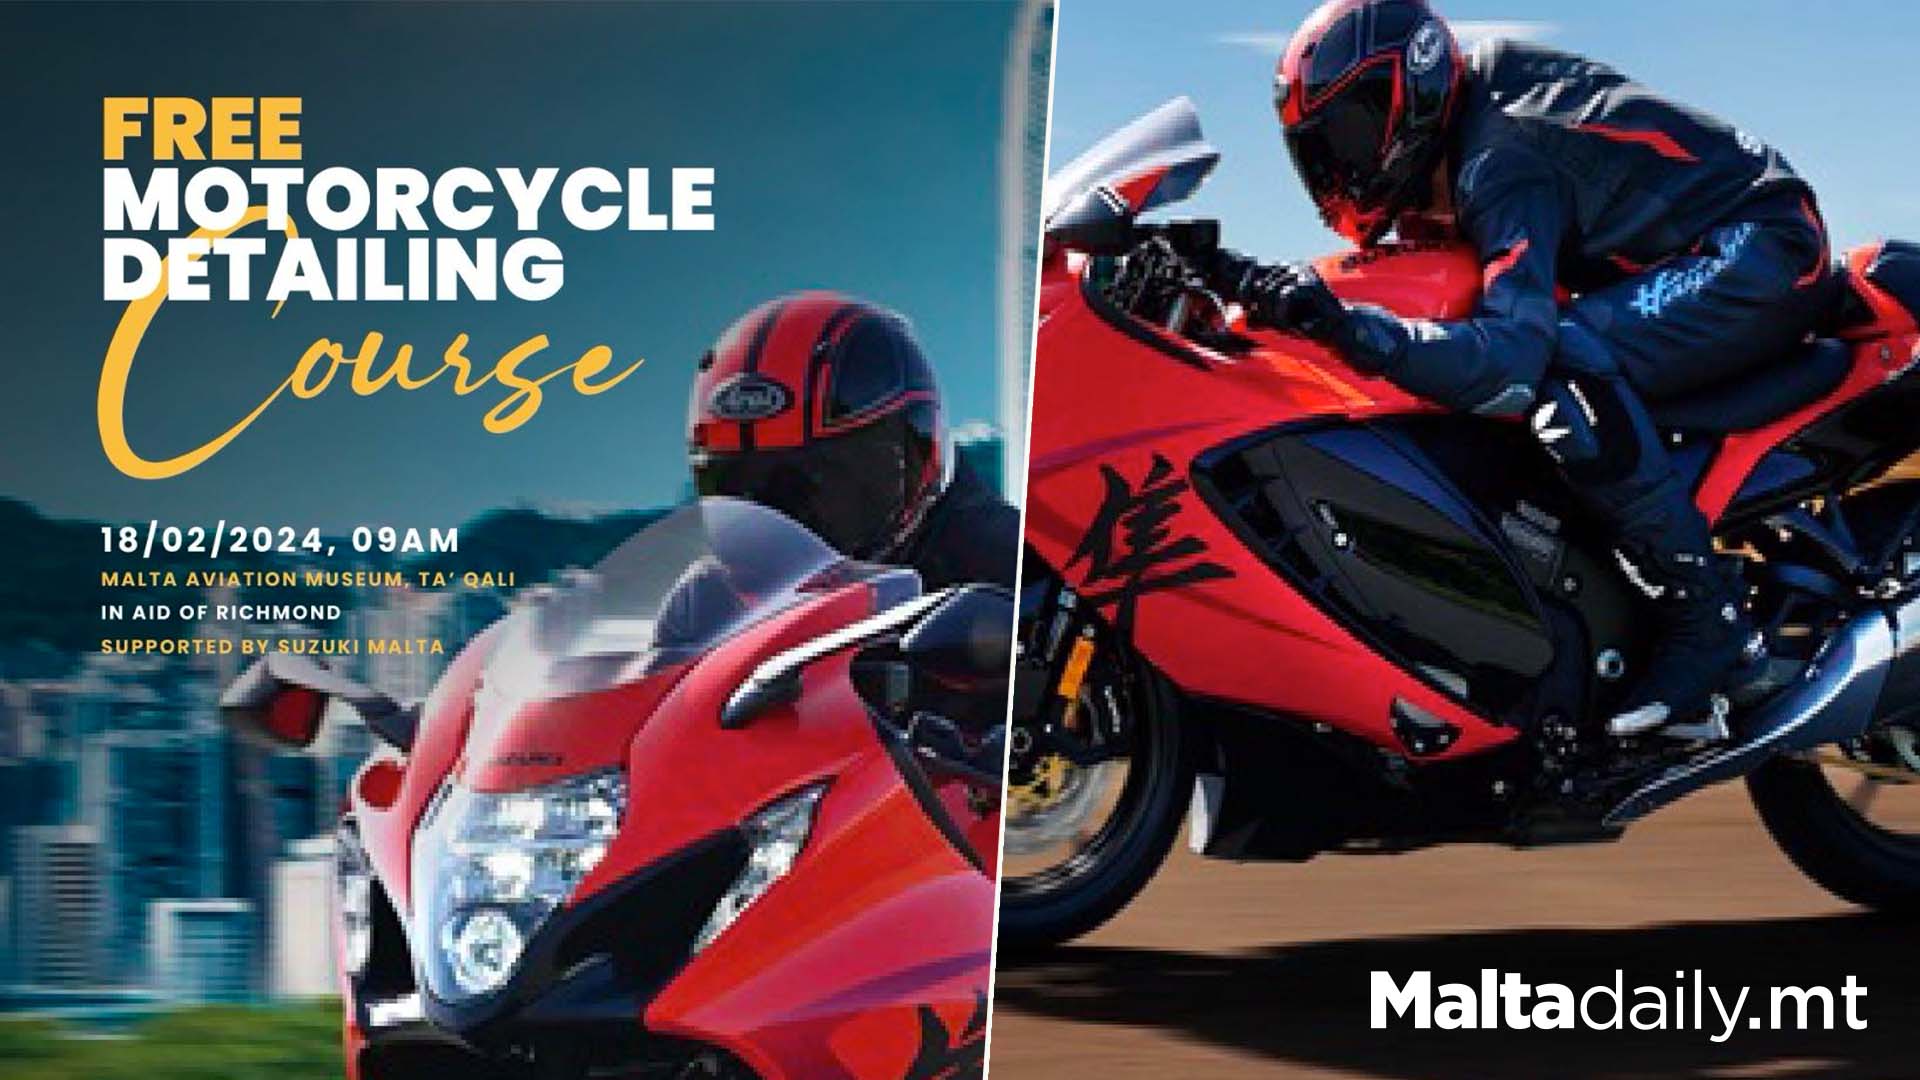 Free Motorcycle Detailing Course For Charity